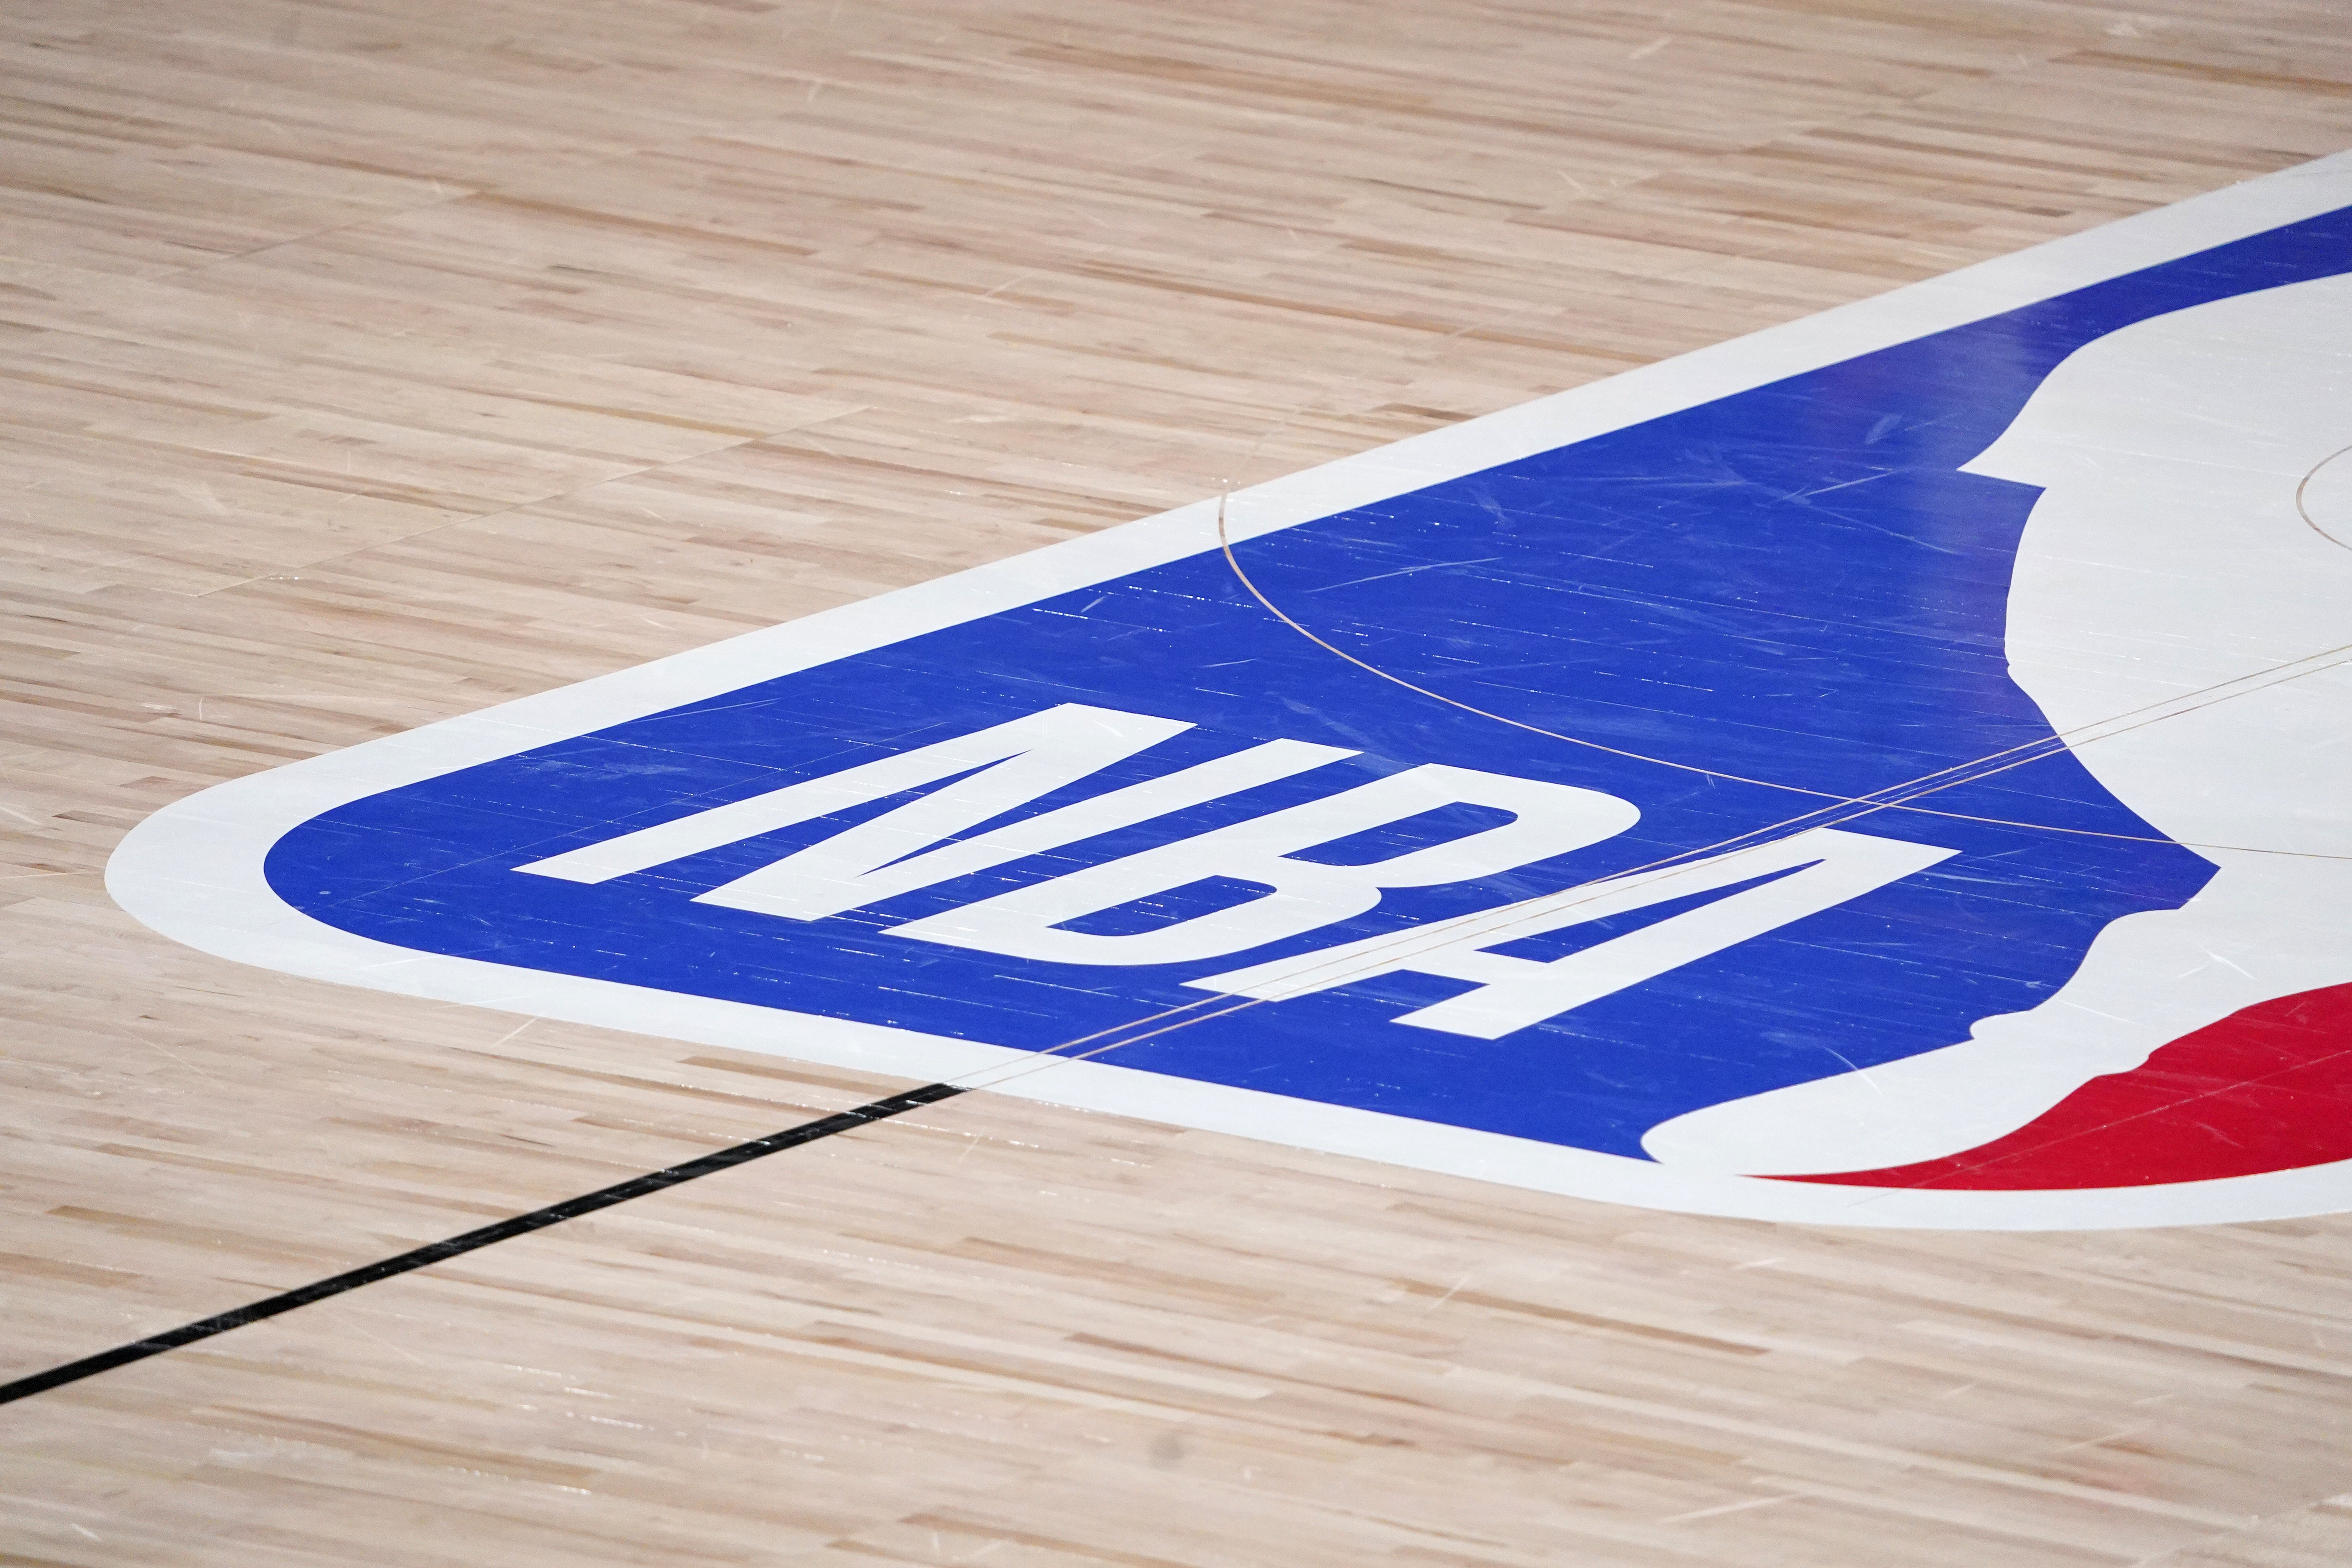 Nba Schedule 2022 23 Nba Schedule 2022: Regular Season, Playoffs, Finals And Key Dates  Reportedly Revealed | Bleacher Report | Latest News, Videos And Highlights